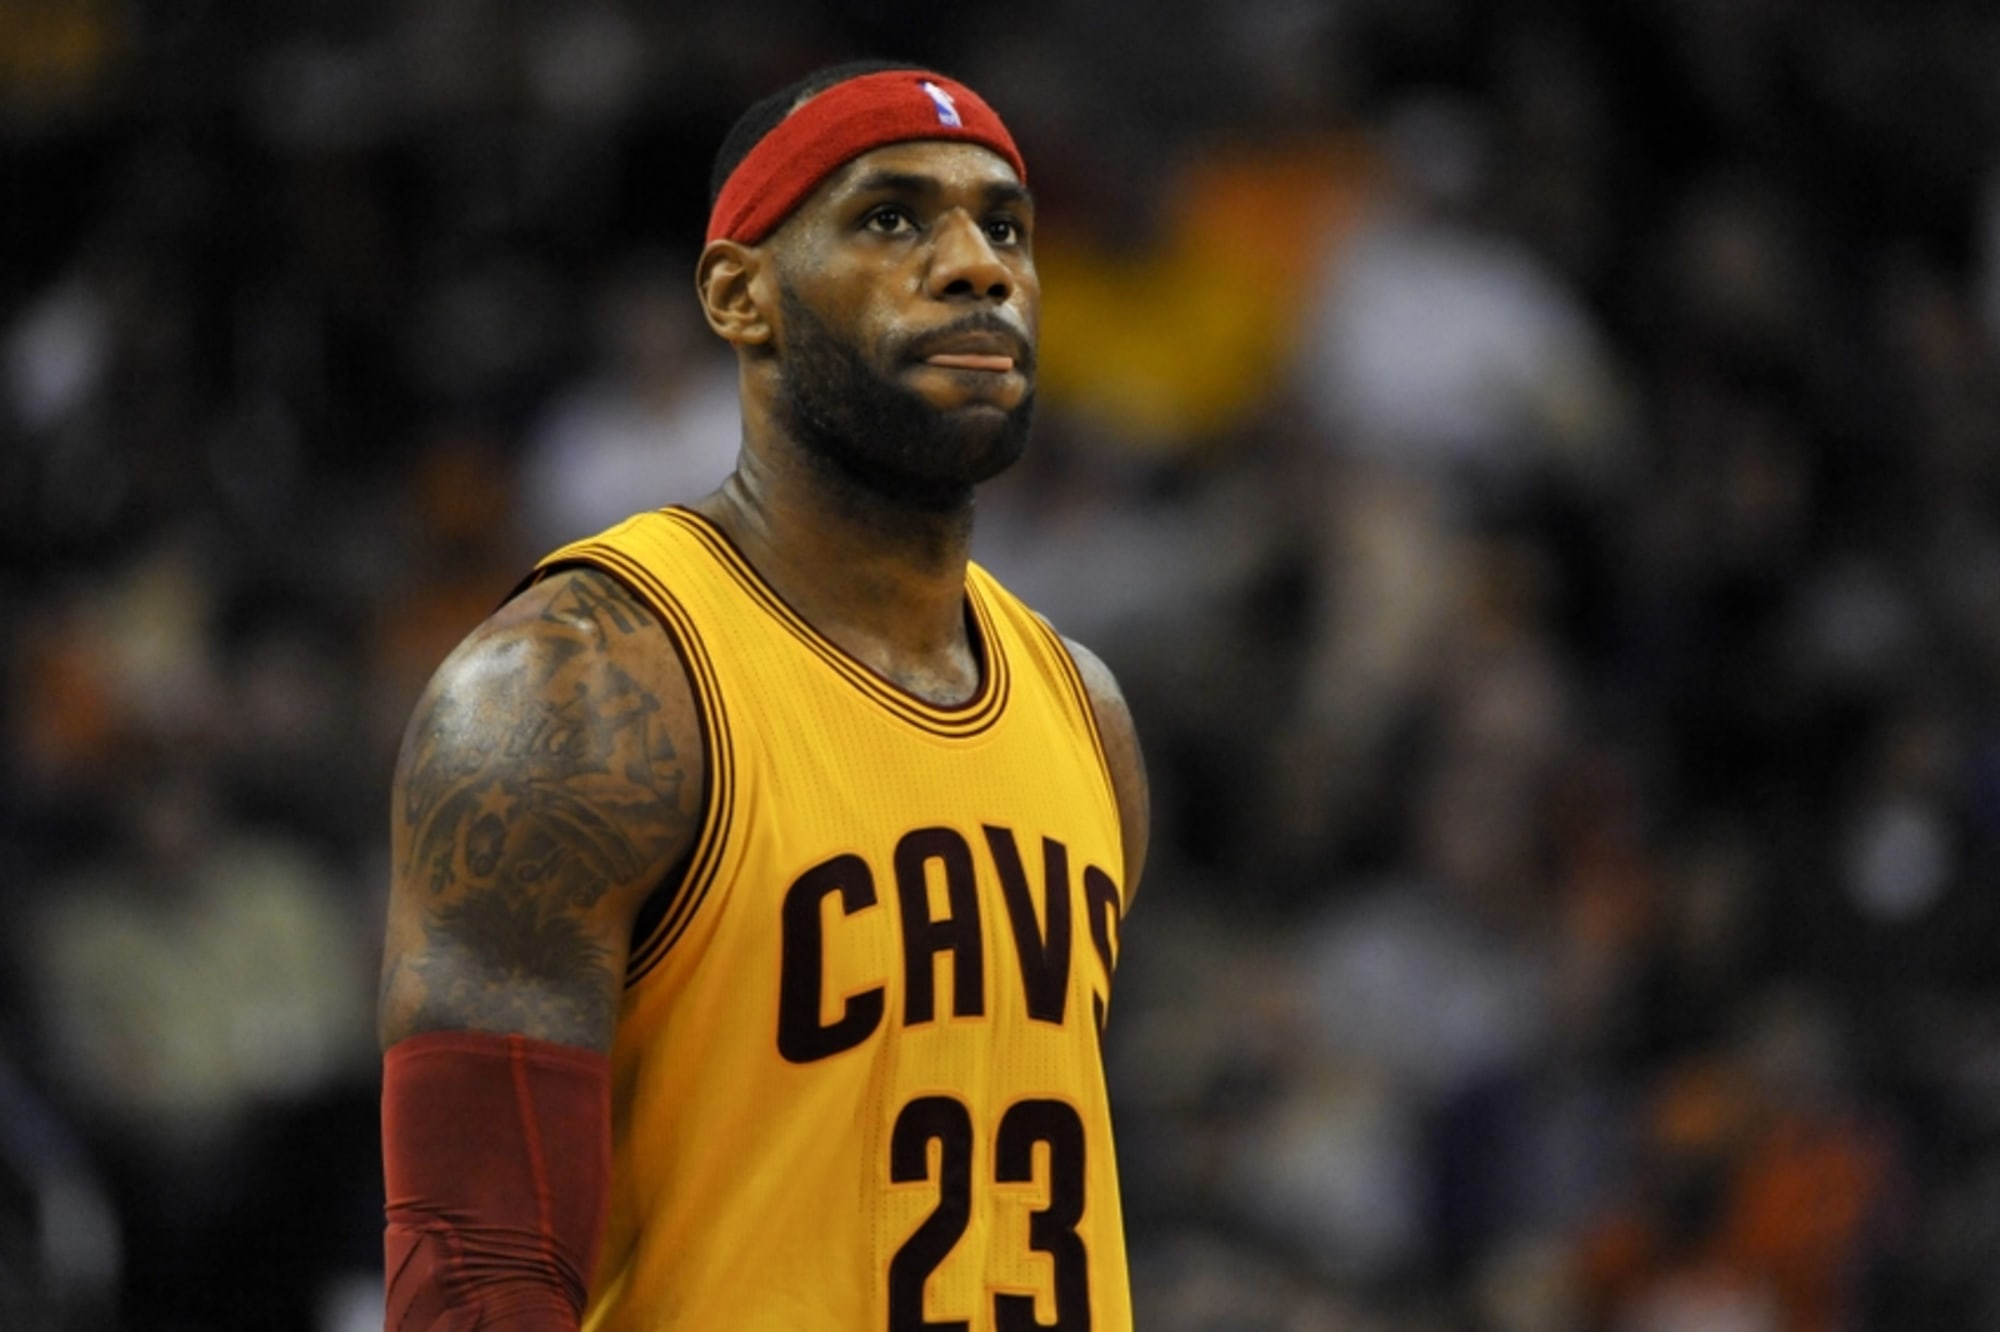 LeBron at 21 has NBA Cavaliers coming of age